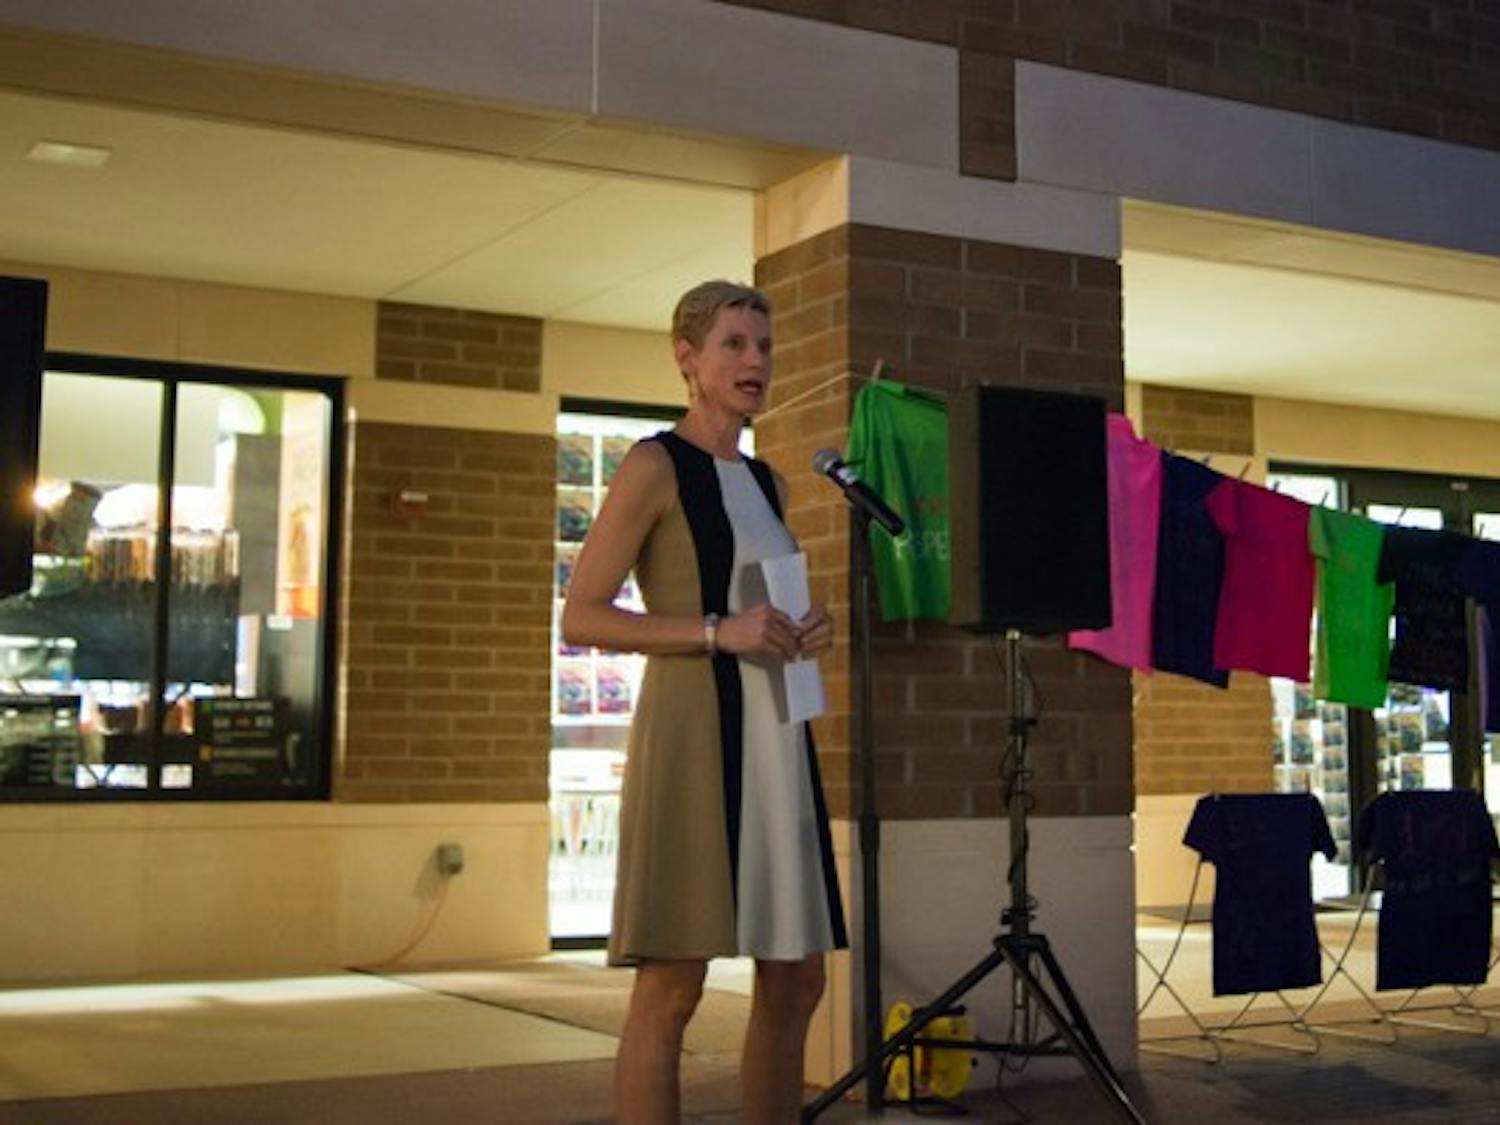 Marlene Tromp, Dean of Arizona State University’s New College of Interdisciplinary Arts and Sciences, speaks to supporters during an anti-sexual assault event at ASU West. (Photo by Andrew Ybanez)